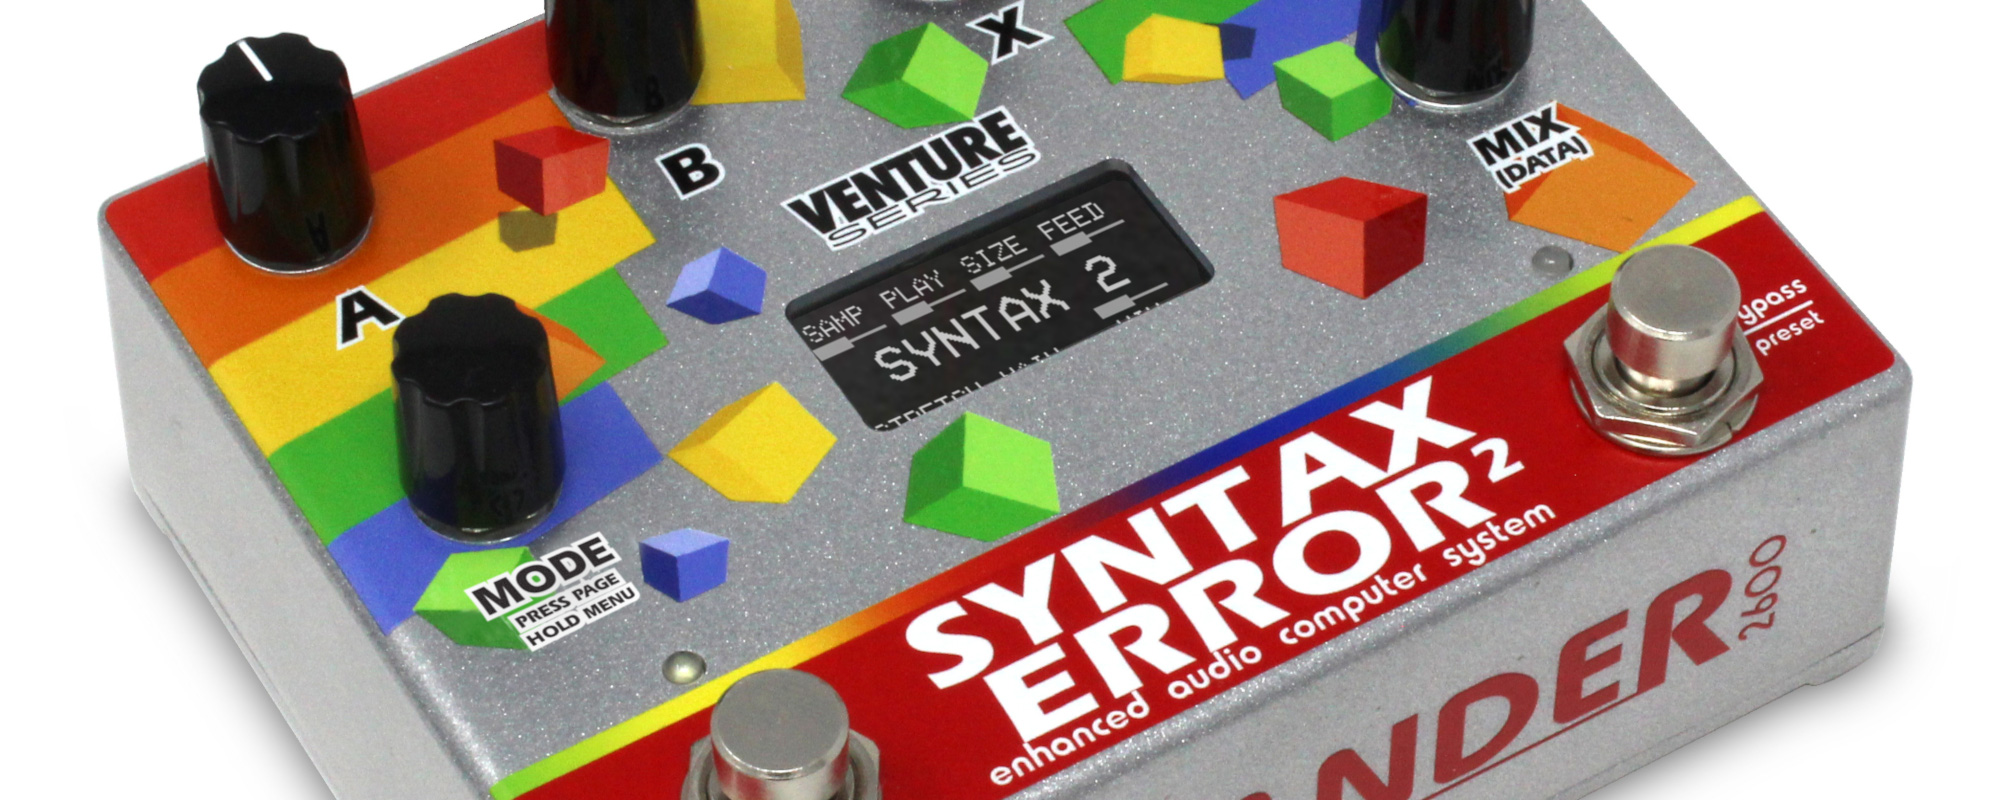 Gear Review: Alexander Pedals Syntax Error 2 - American Songwriter